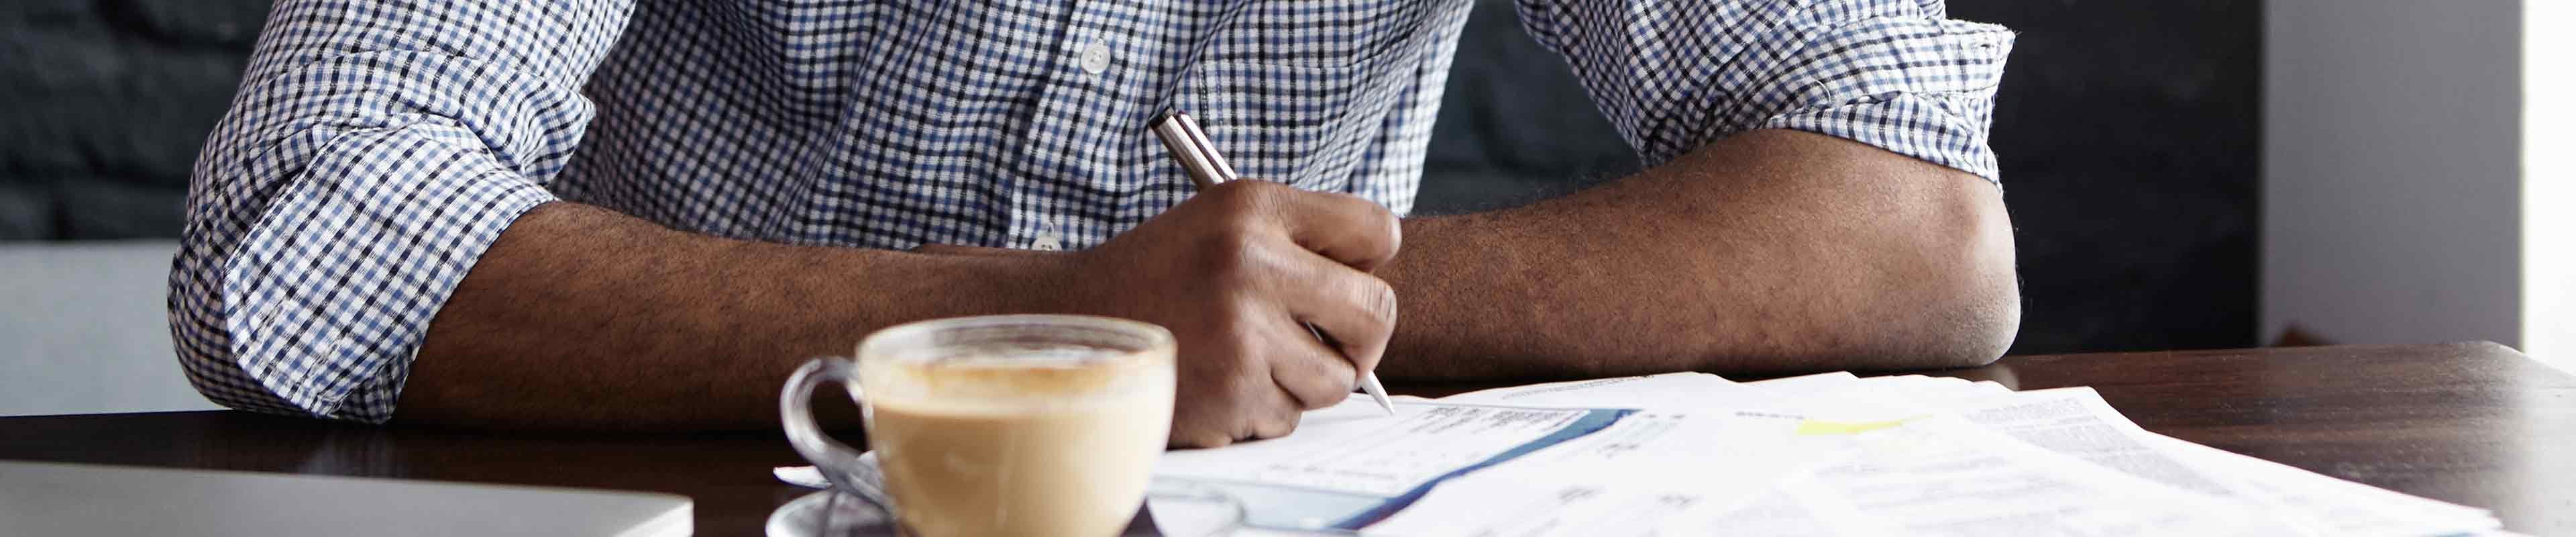 young black man sitting at a desk with a cup of coffee in front of him looking at paperwork